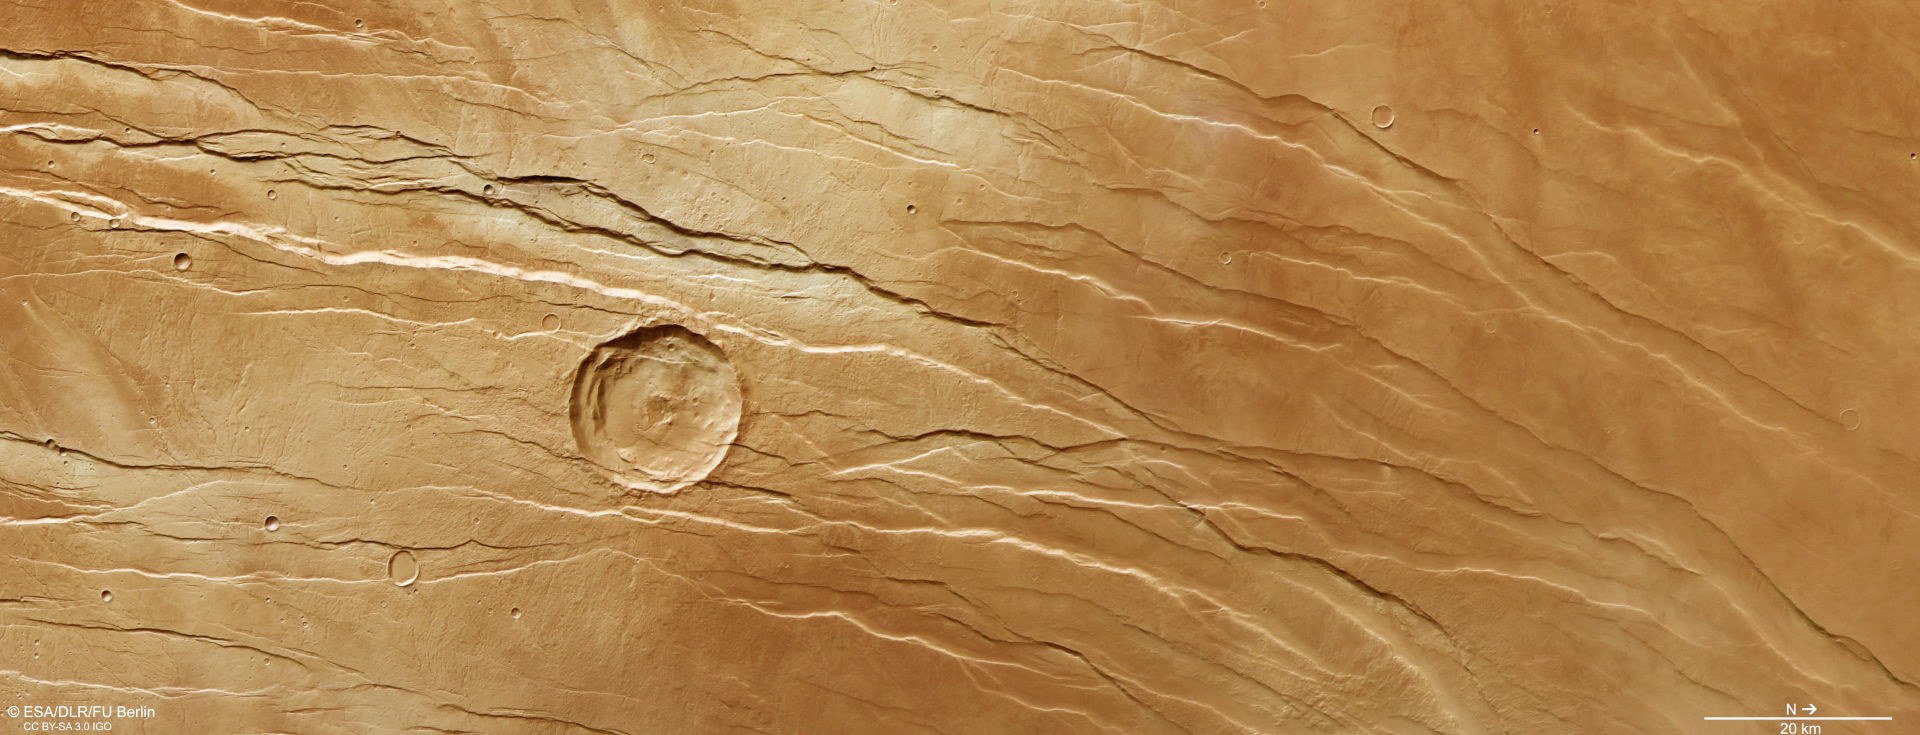 Vertical plan view of part of the Tantalus Fossae graben system